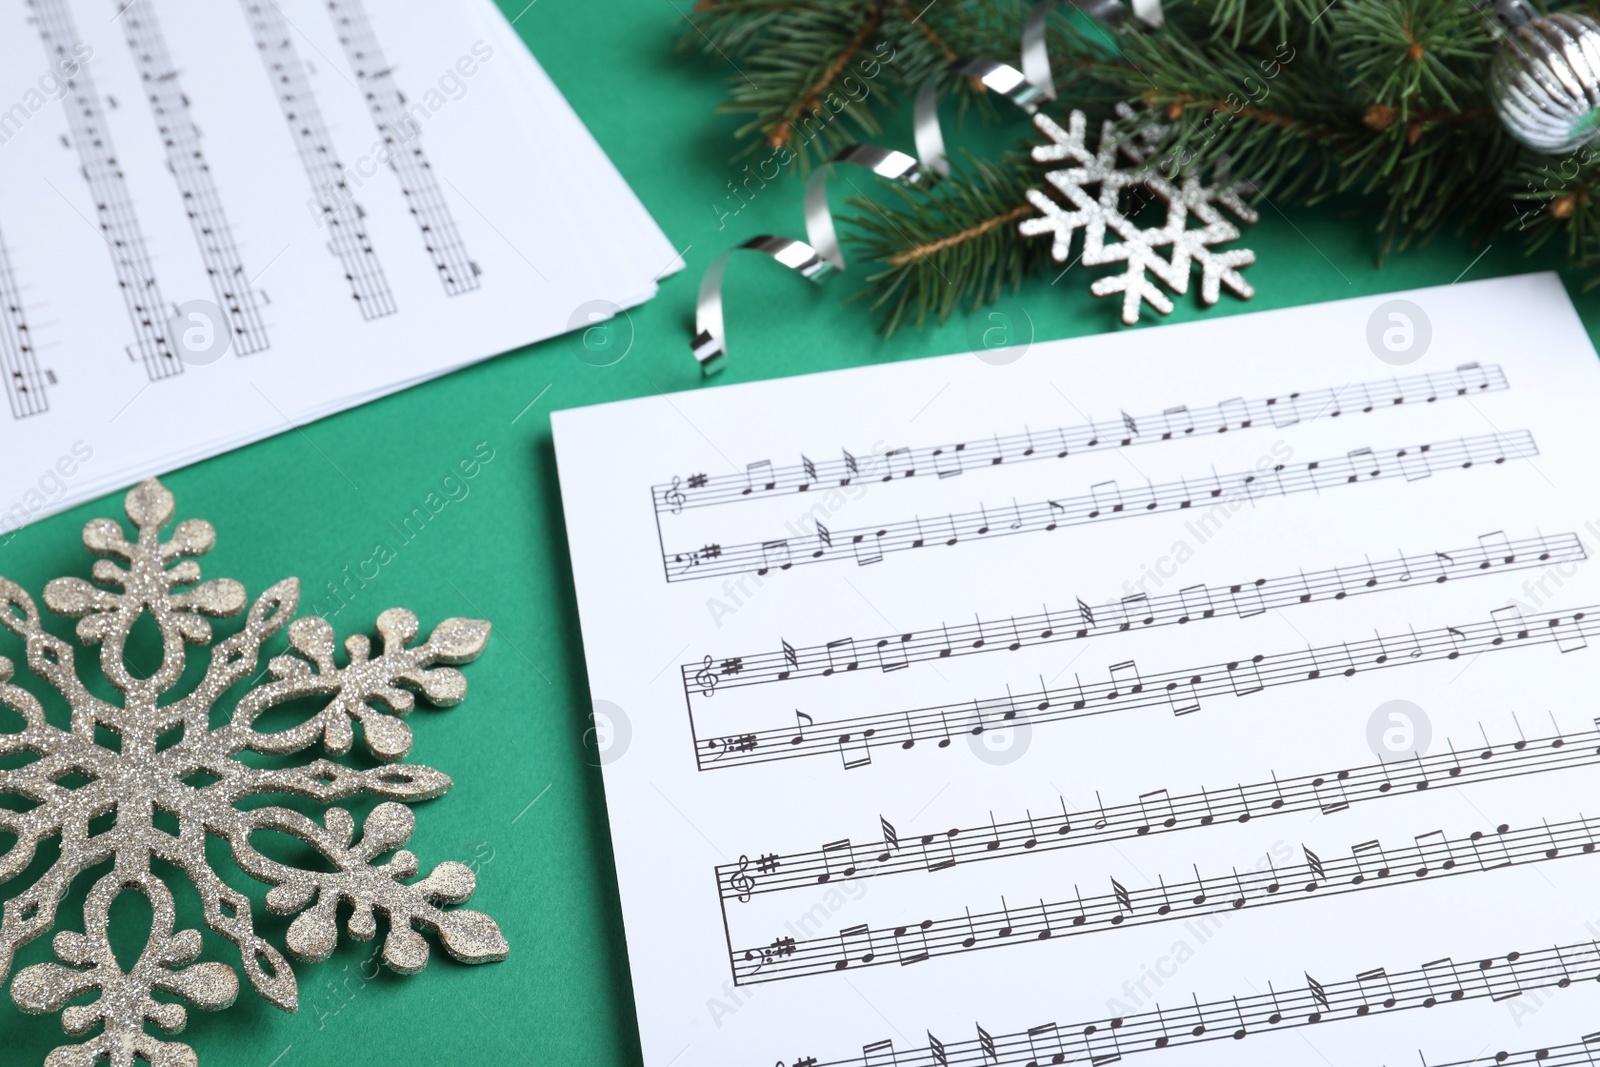 Photo of Christmas music sheets near fir tree branches and decorative snowflakes on green background, closeup